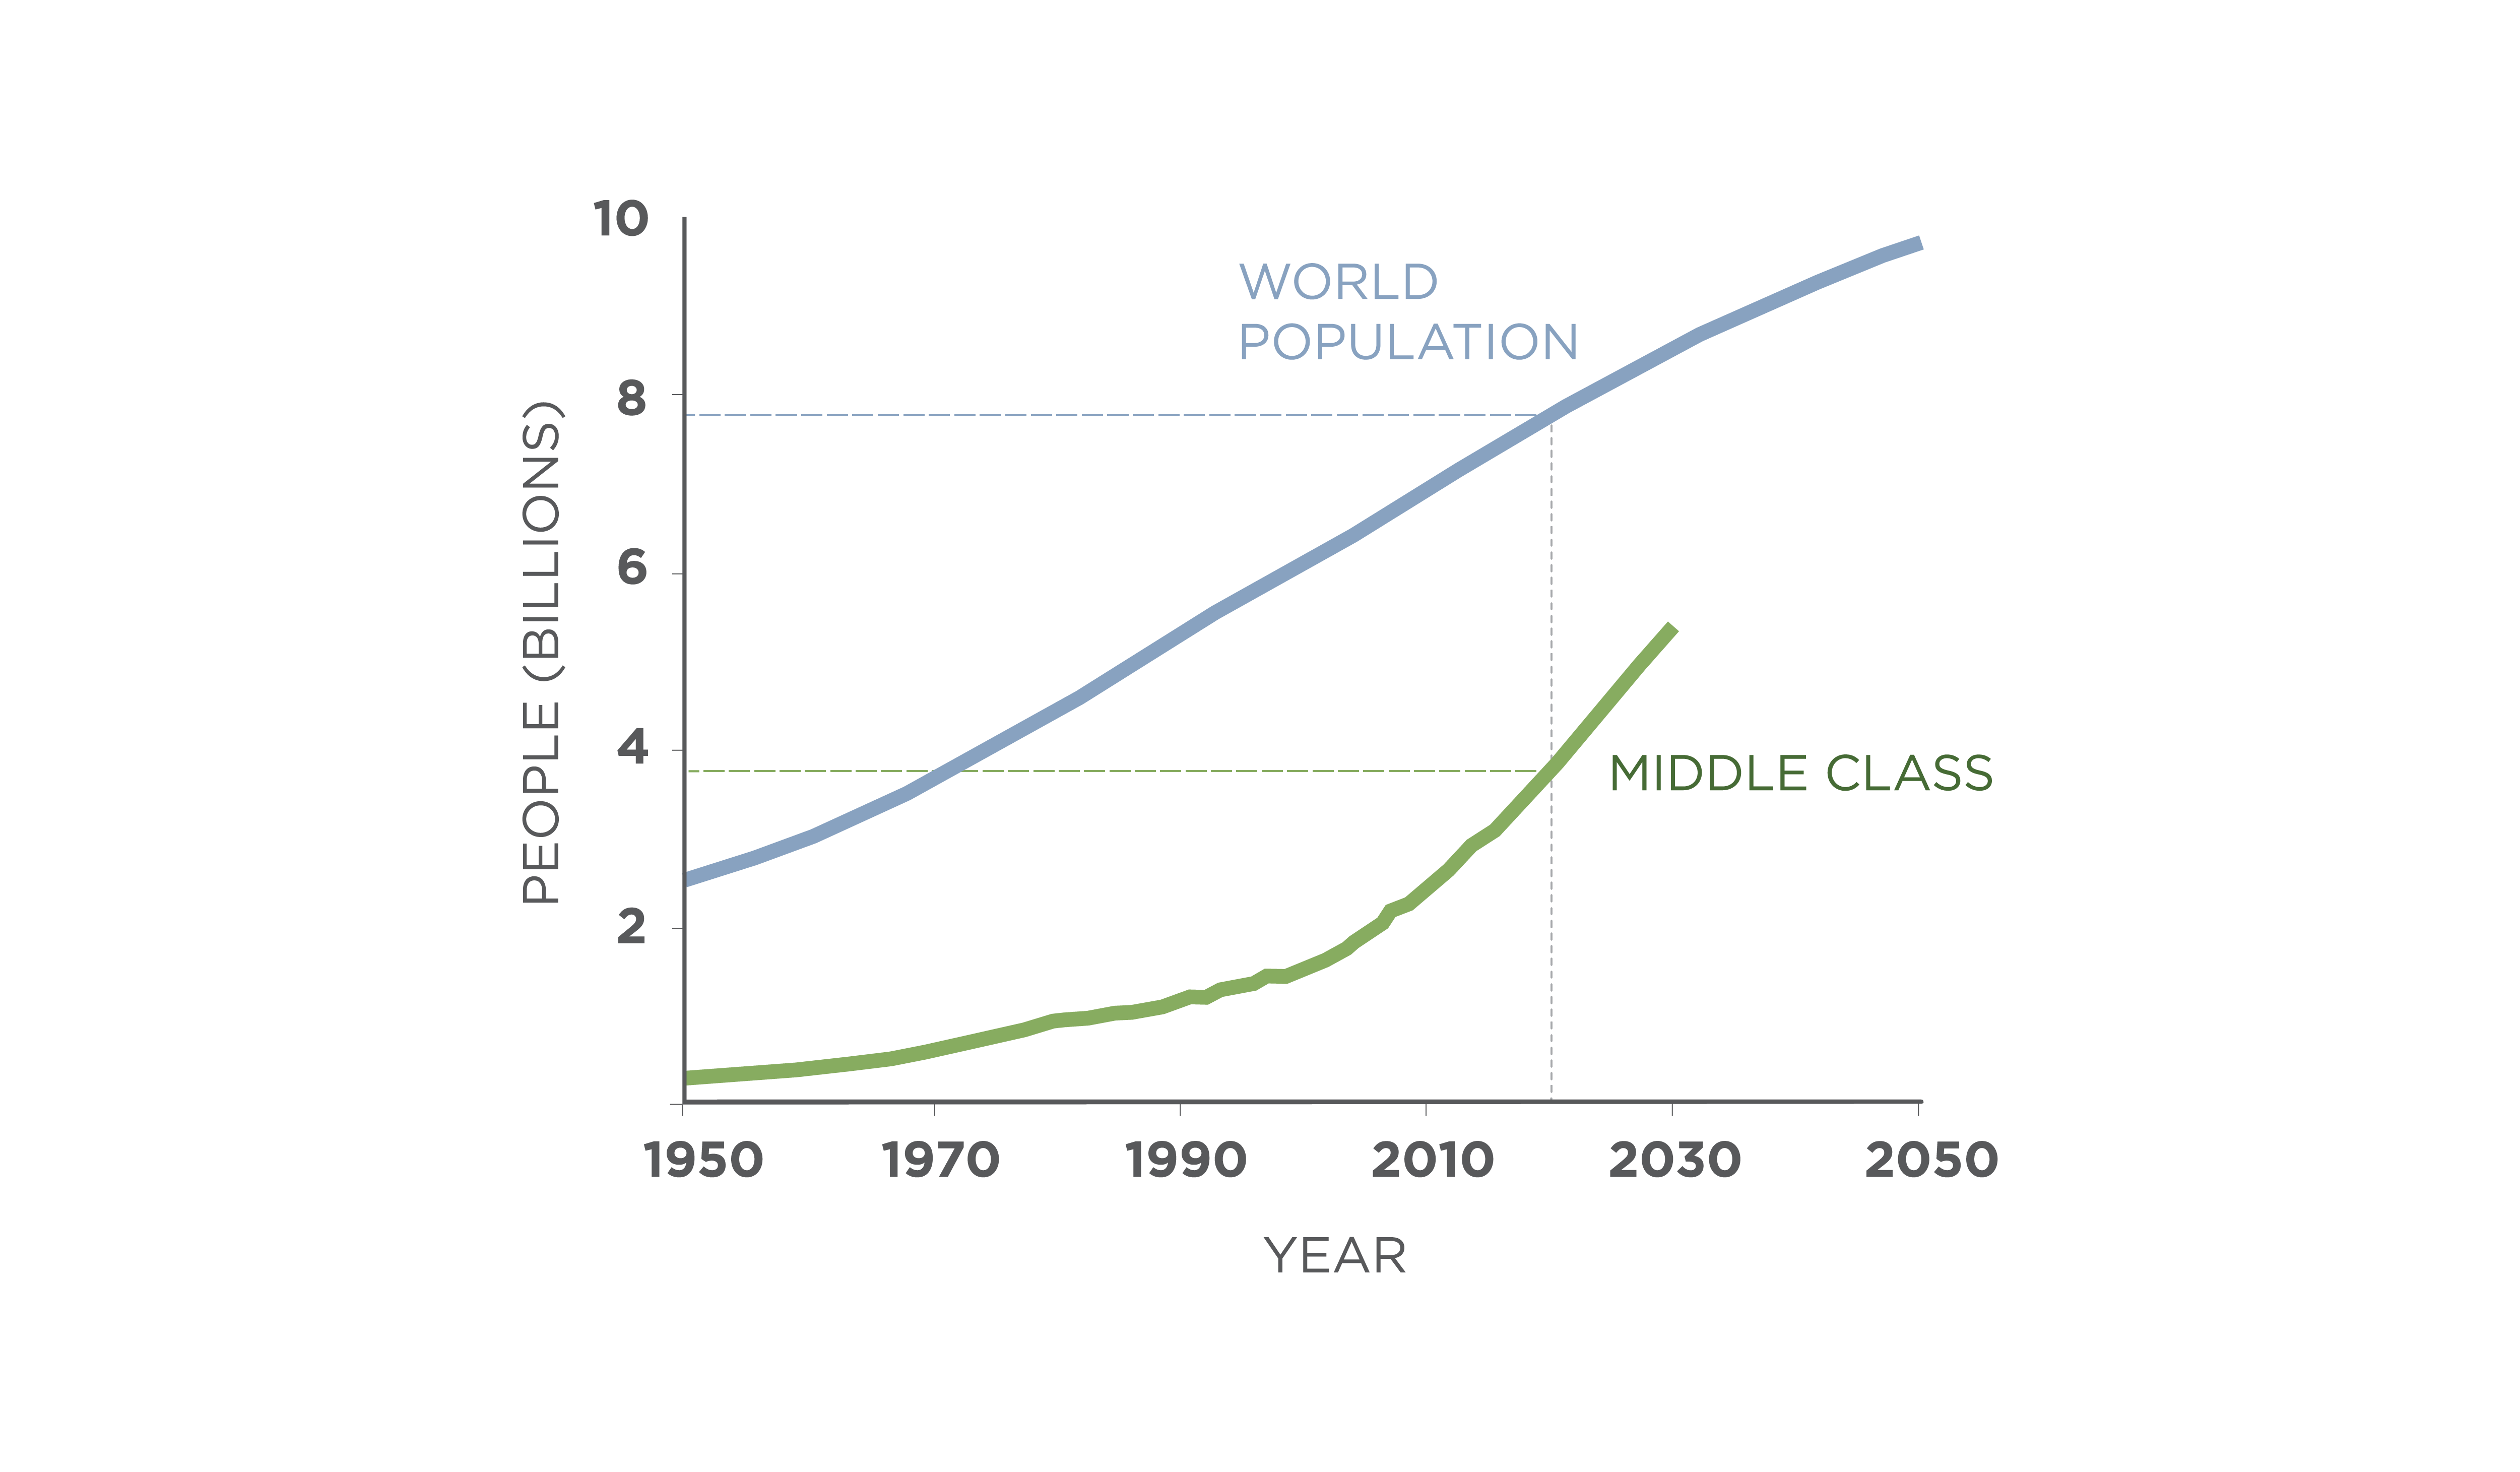 A line chart comparing the growing world population to the middle class population every 20 years which are both growing at high rates concurrently.